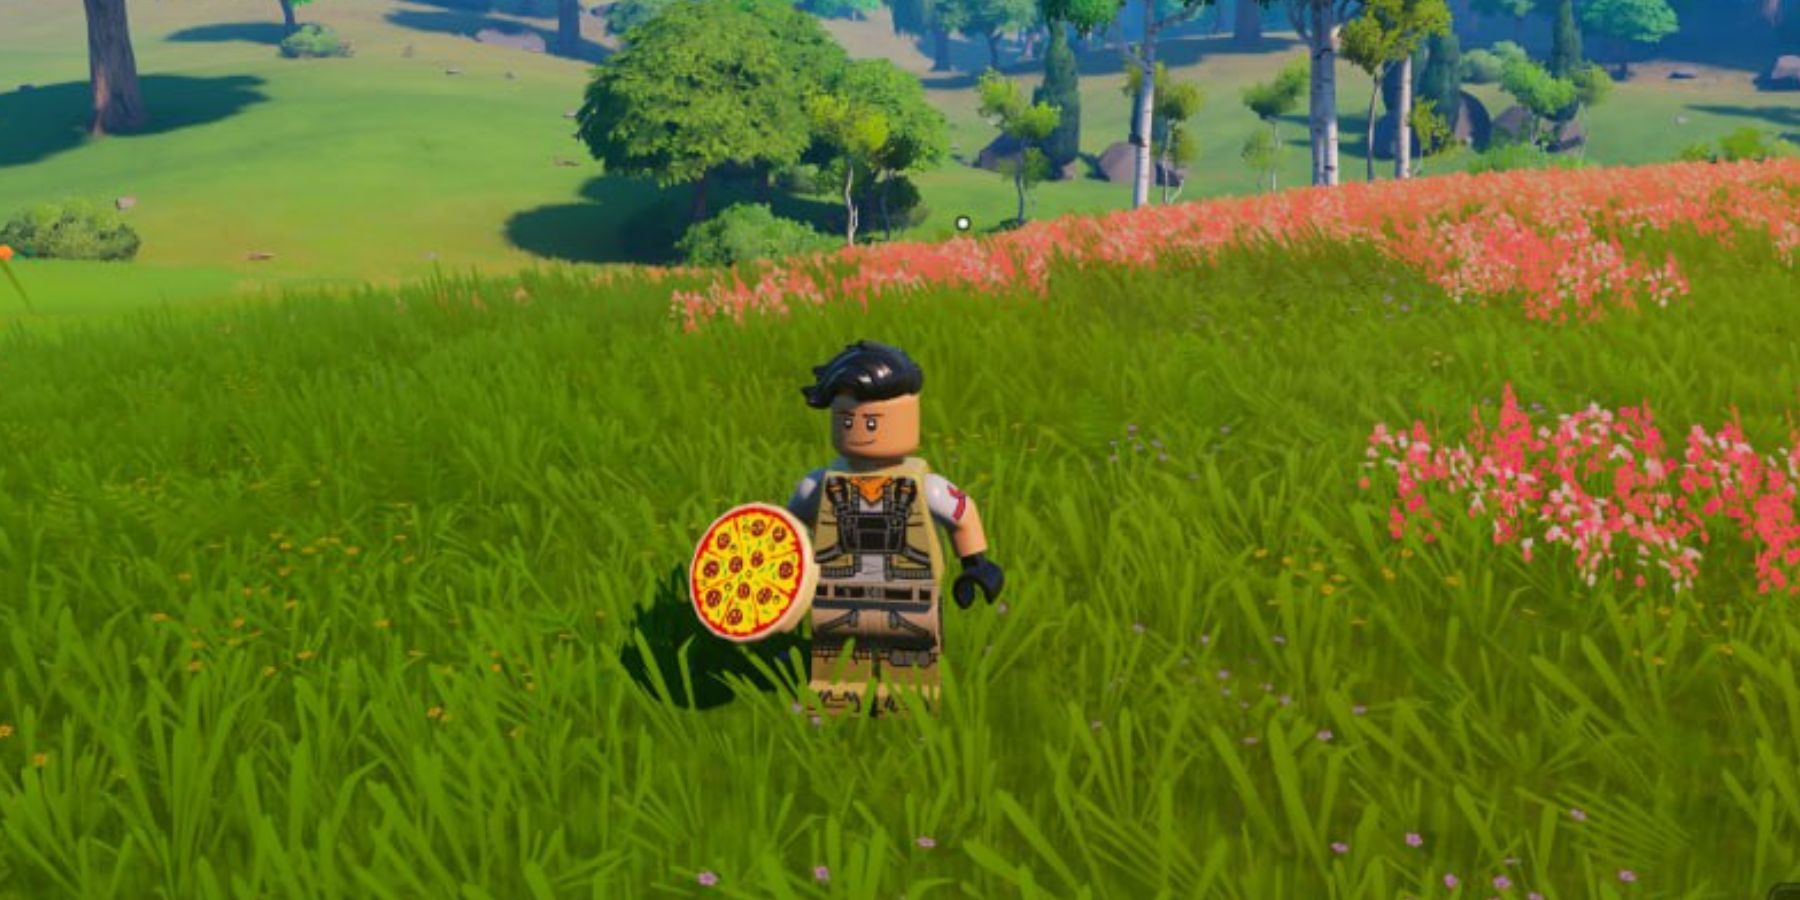 How to Make Pizza in Lego Fortnite